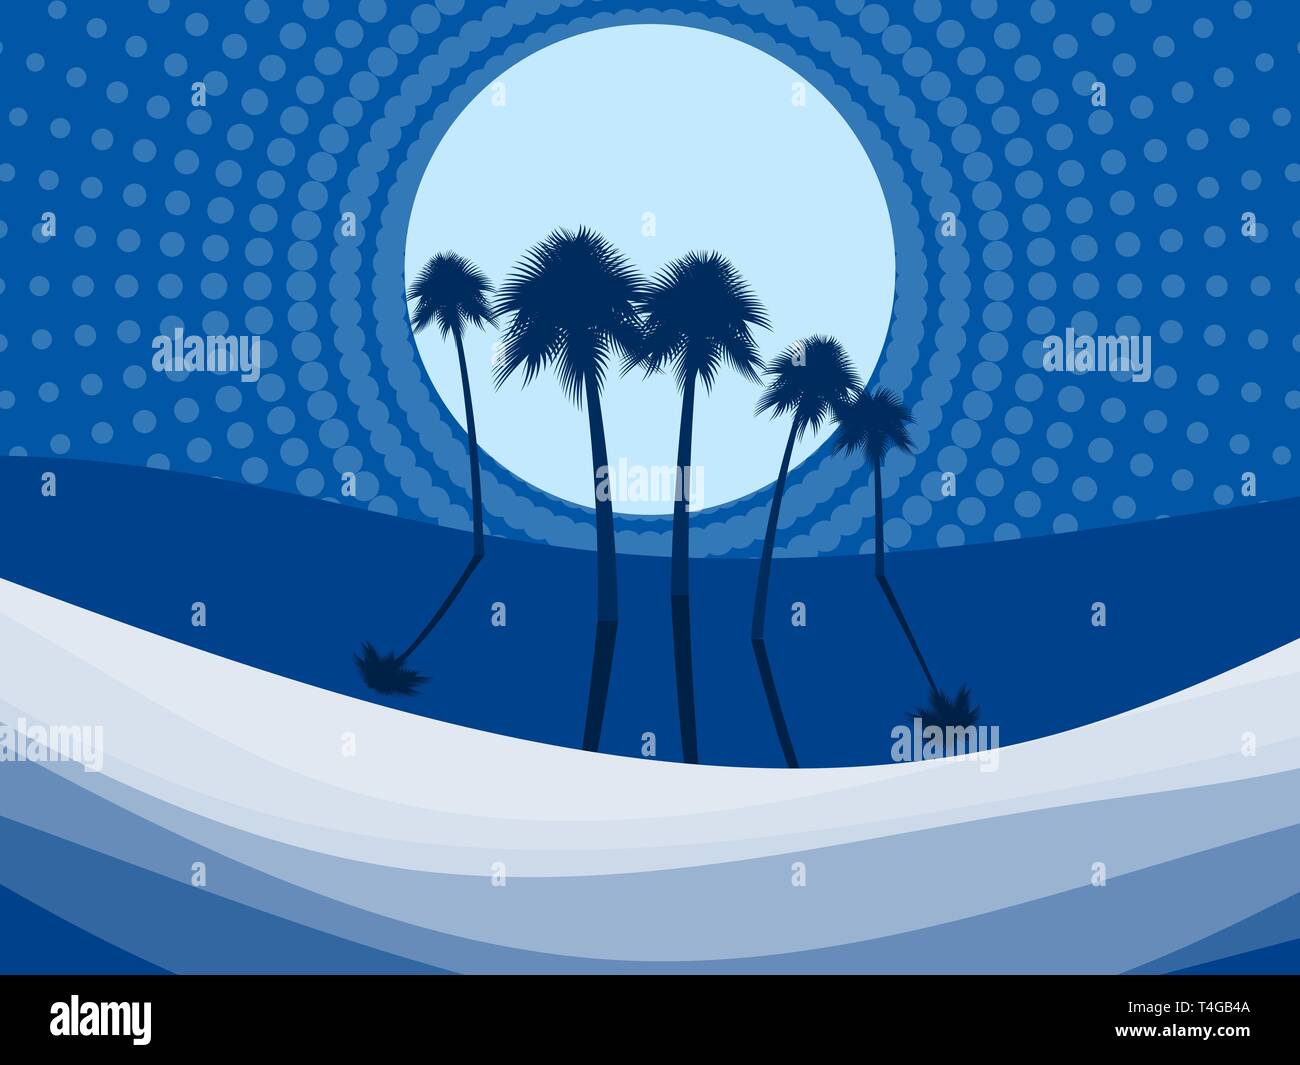 Night landscape with palm trees on the beach. Dots in the style of pop art. Vector illustration Stock Vector